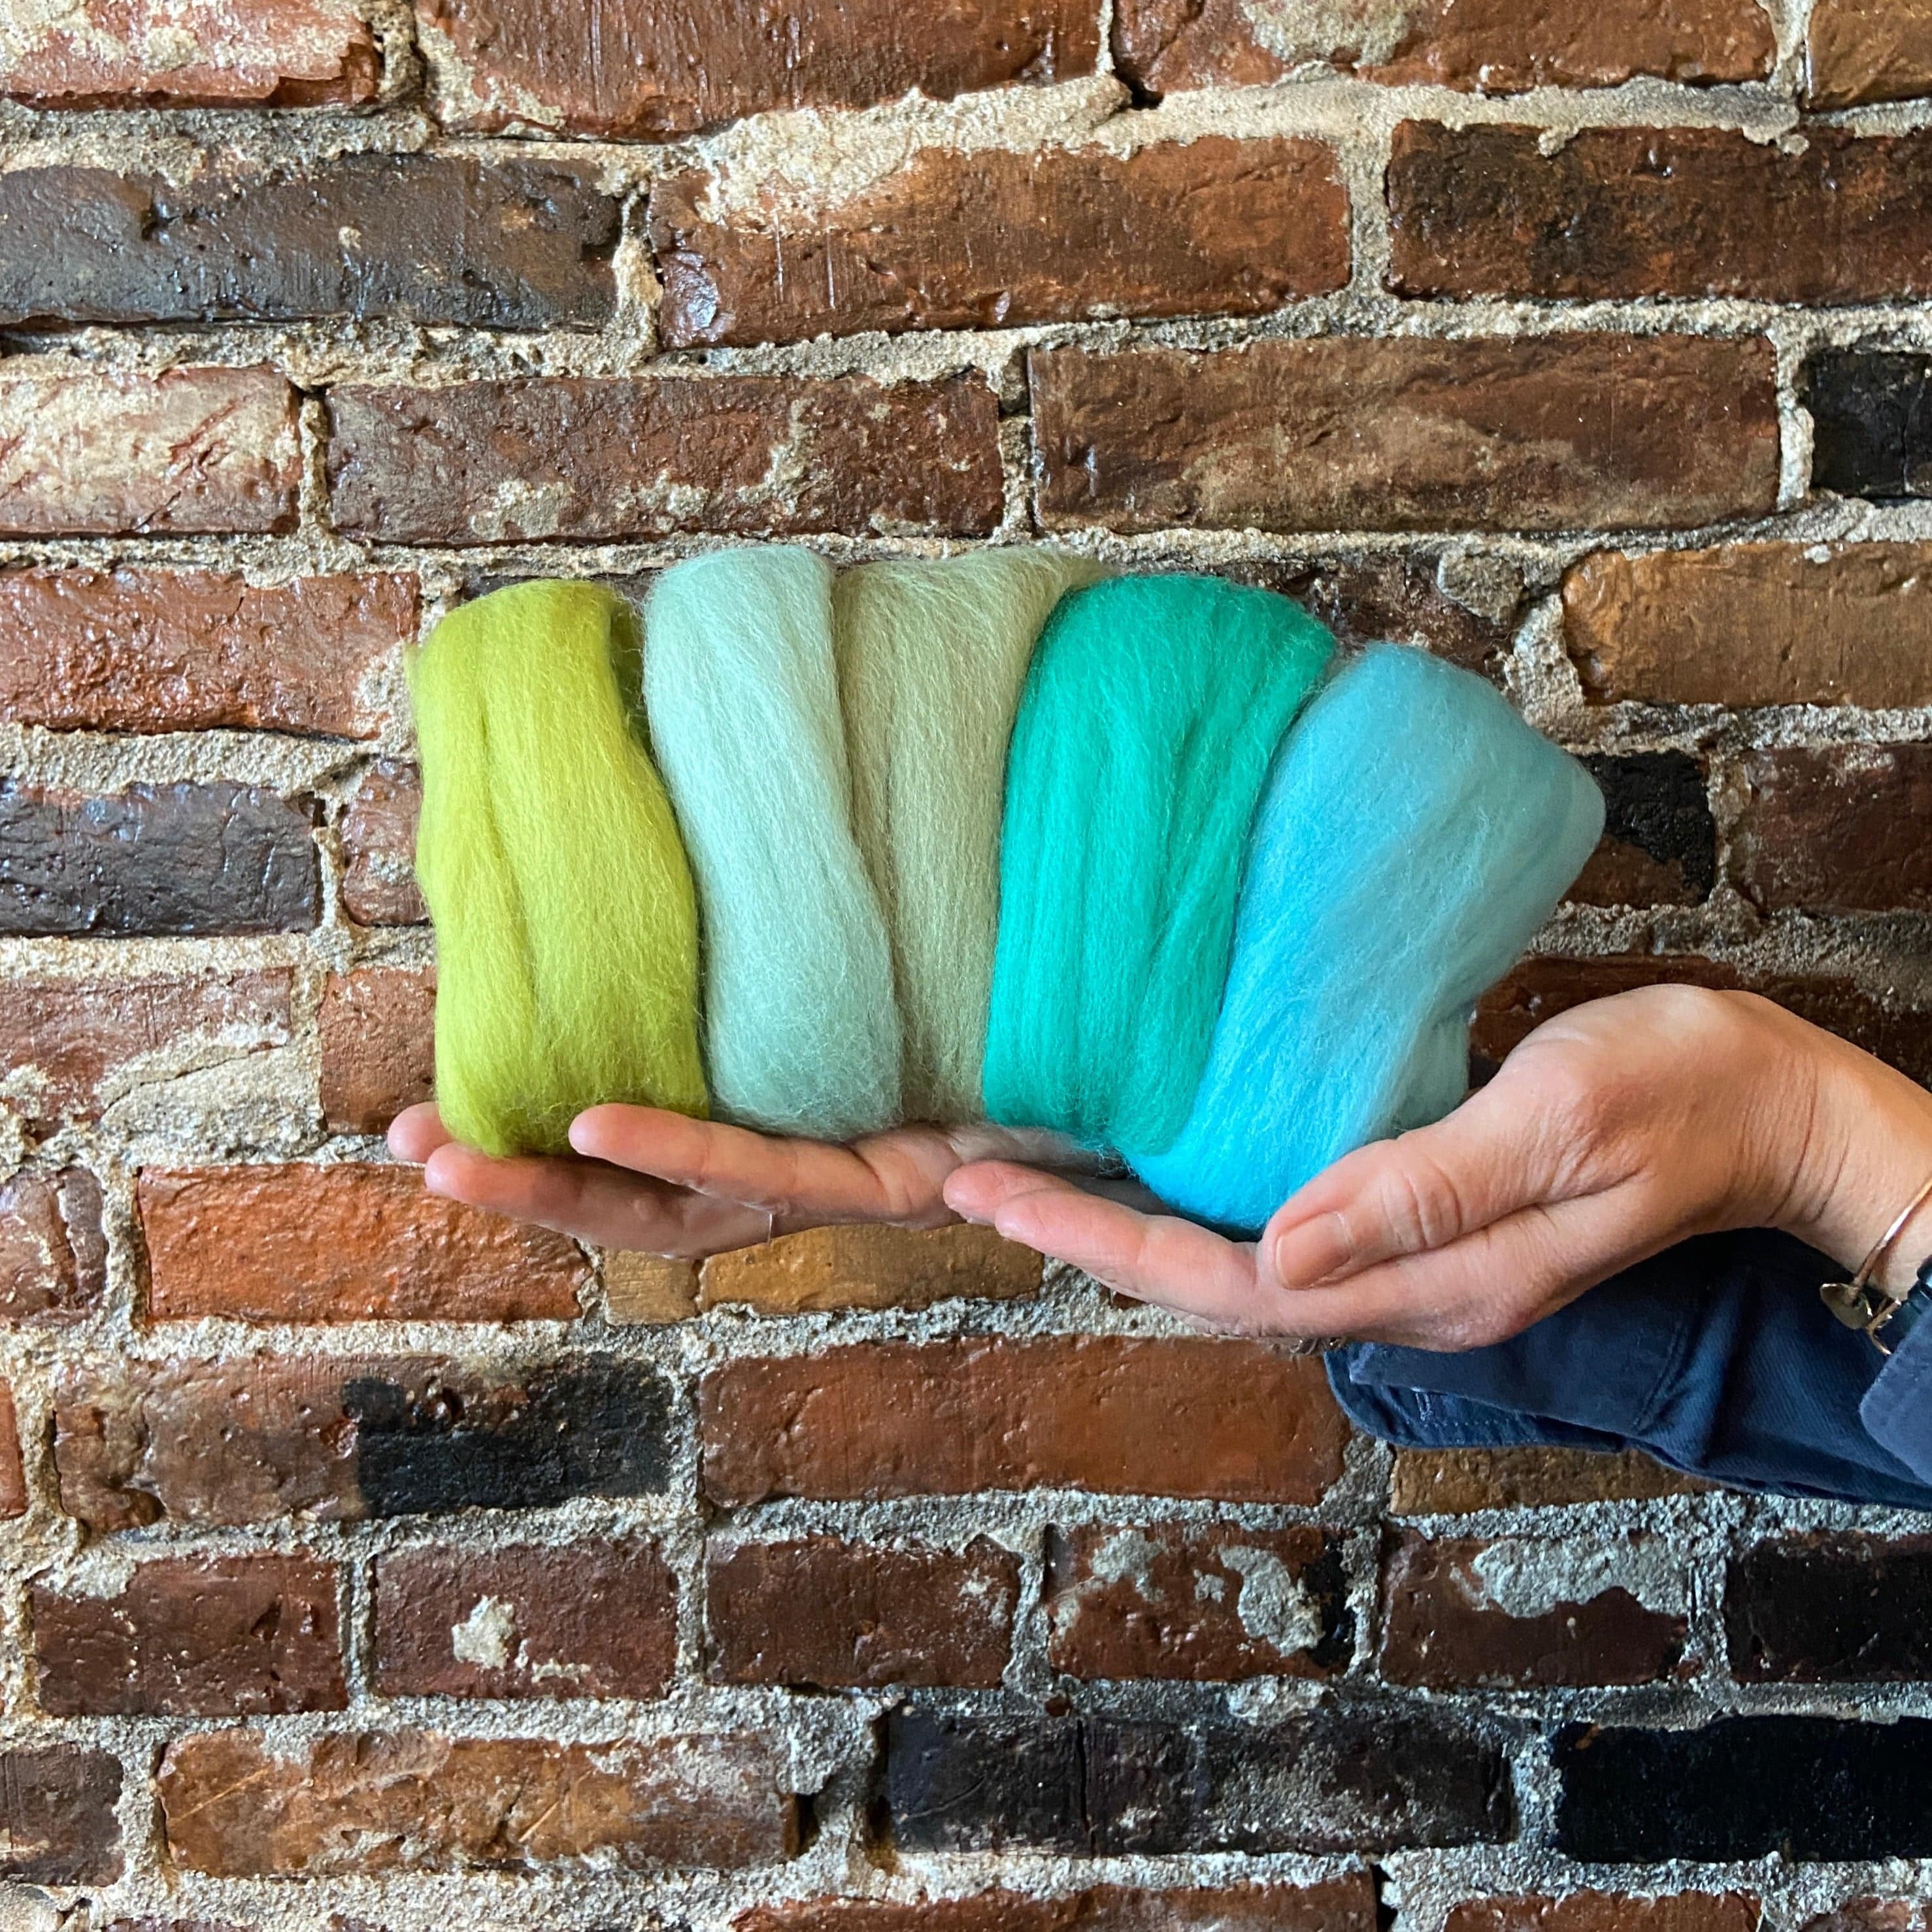 Default Five Merino Roving Colors in Turquoise and Green Shades - 50 gram bag - Color Set 6 - Raised and Procesed in Europe